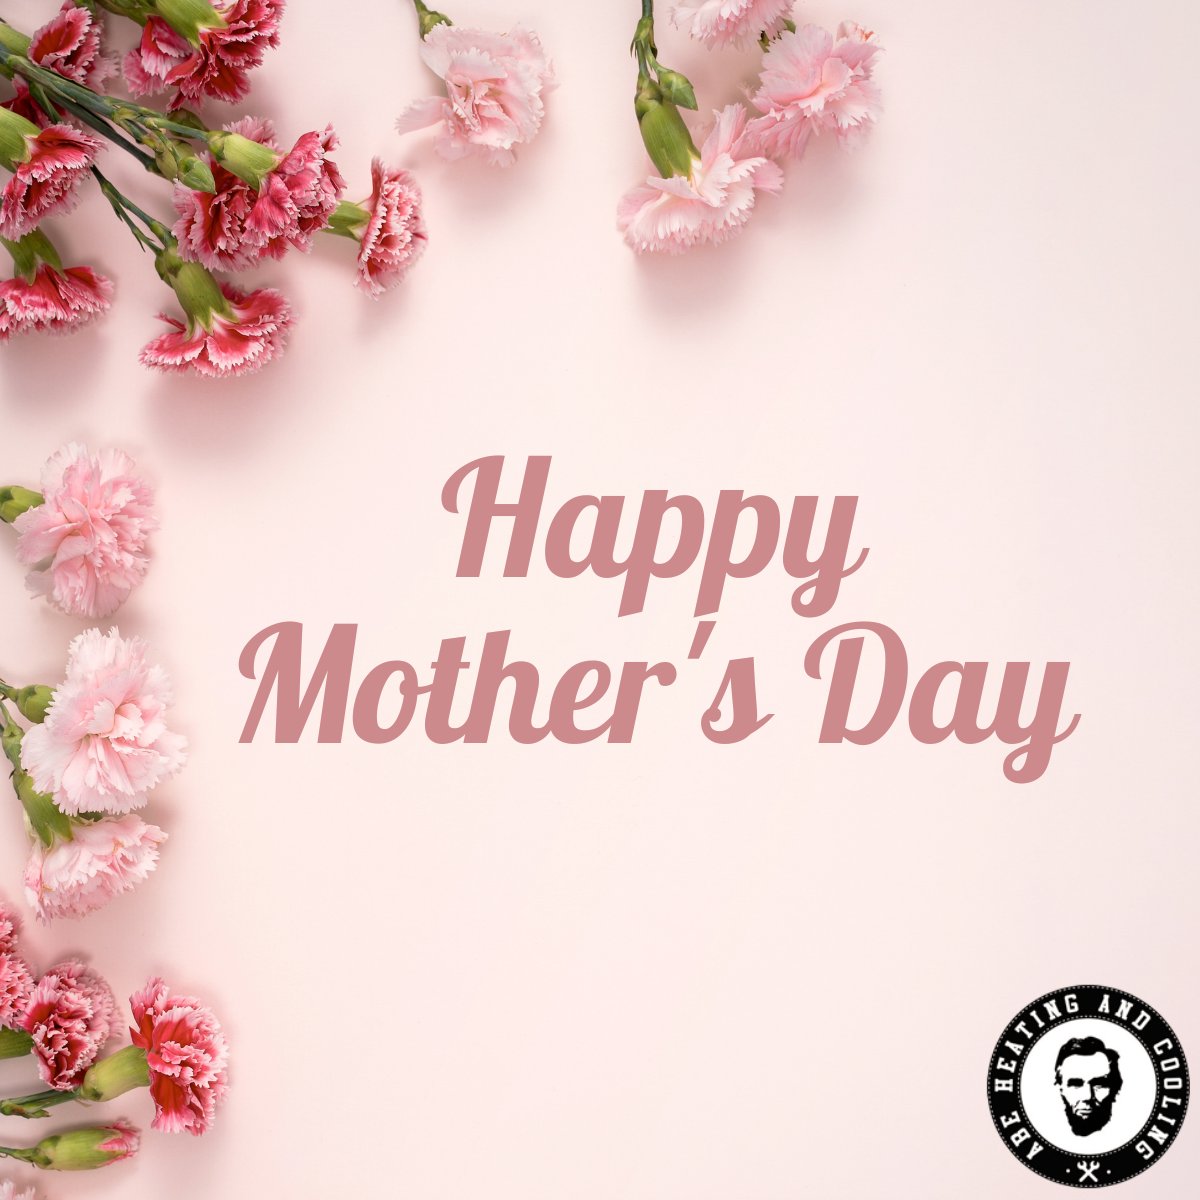 Happy Mother's Day!

#HappyMothersDay #HVACcontractors #HVACExperts #HVACColorado #HVACService #HVACTech #HVACDenver #ABEHeatingandCooling